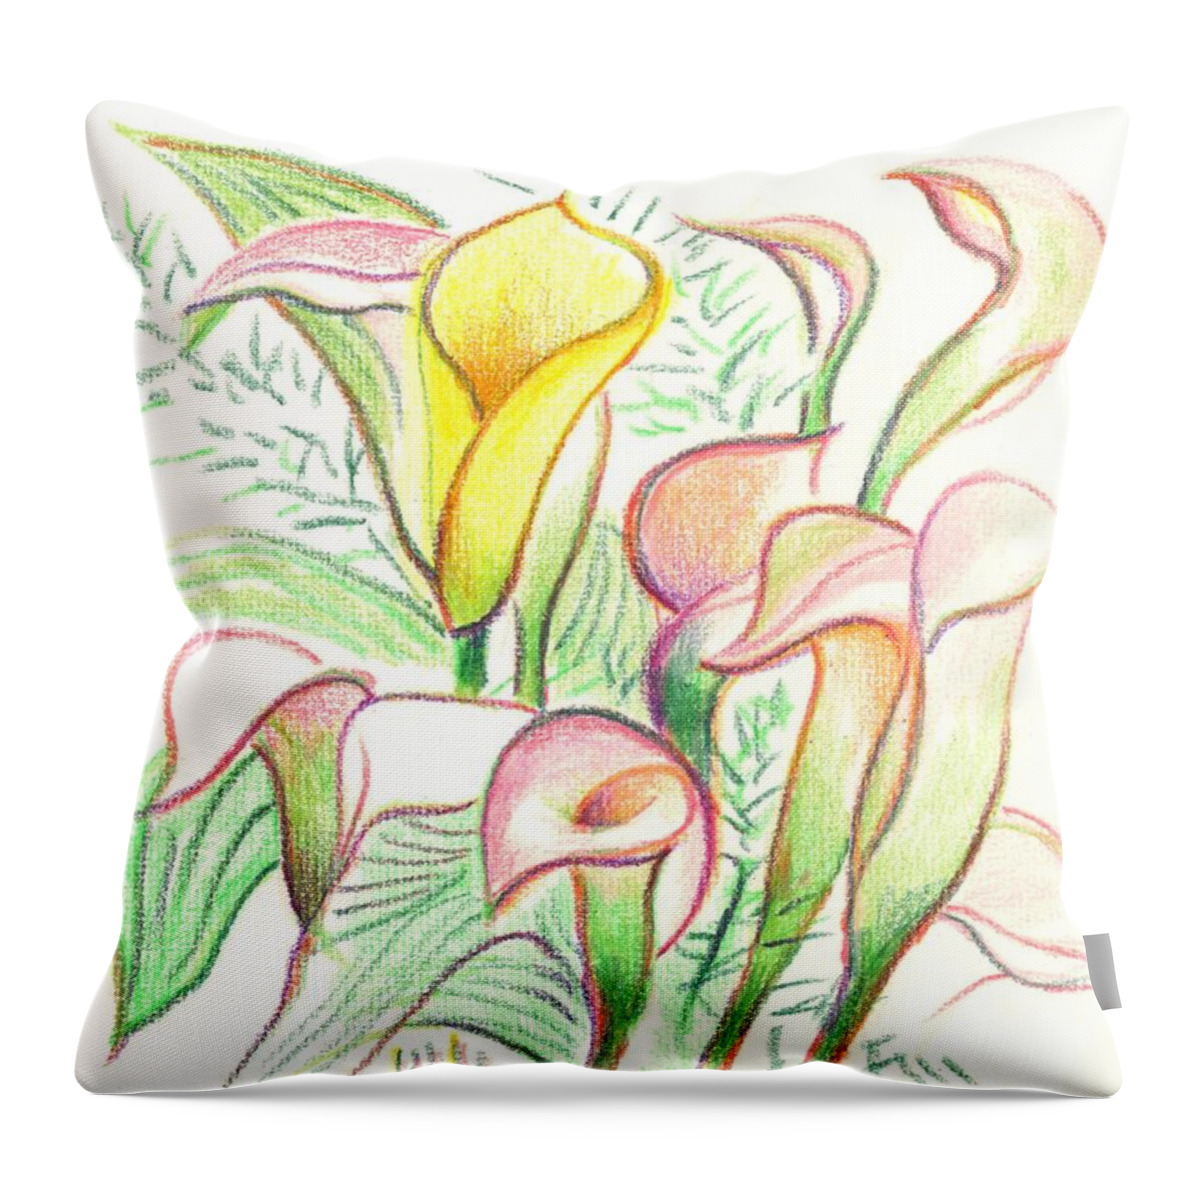 In The Golden Afternoon Throw Pillow featuring the painting In the Golden Afternoon by Kip DeVore